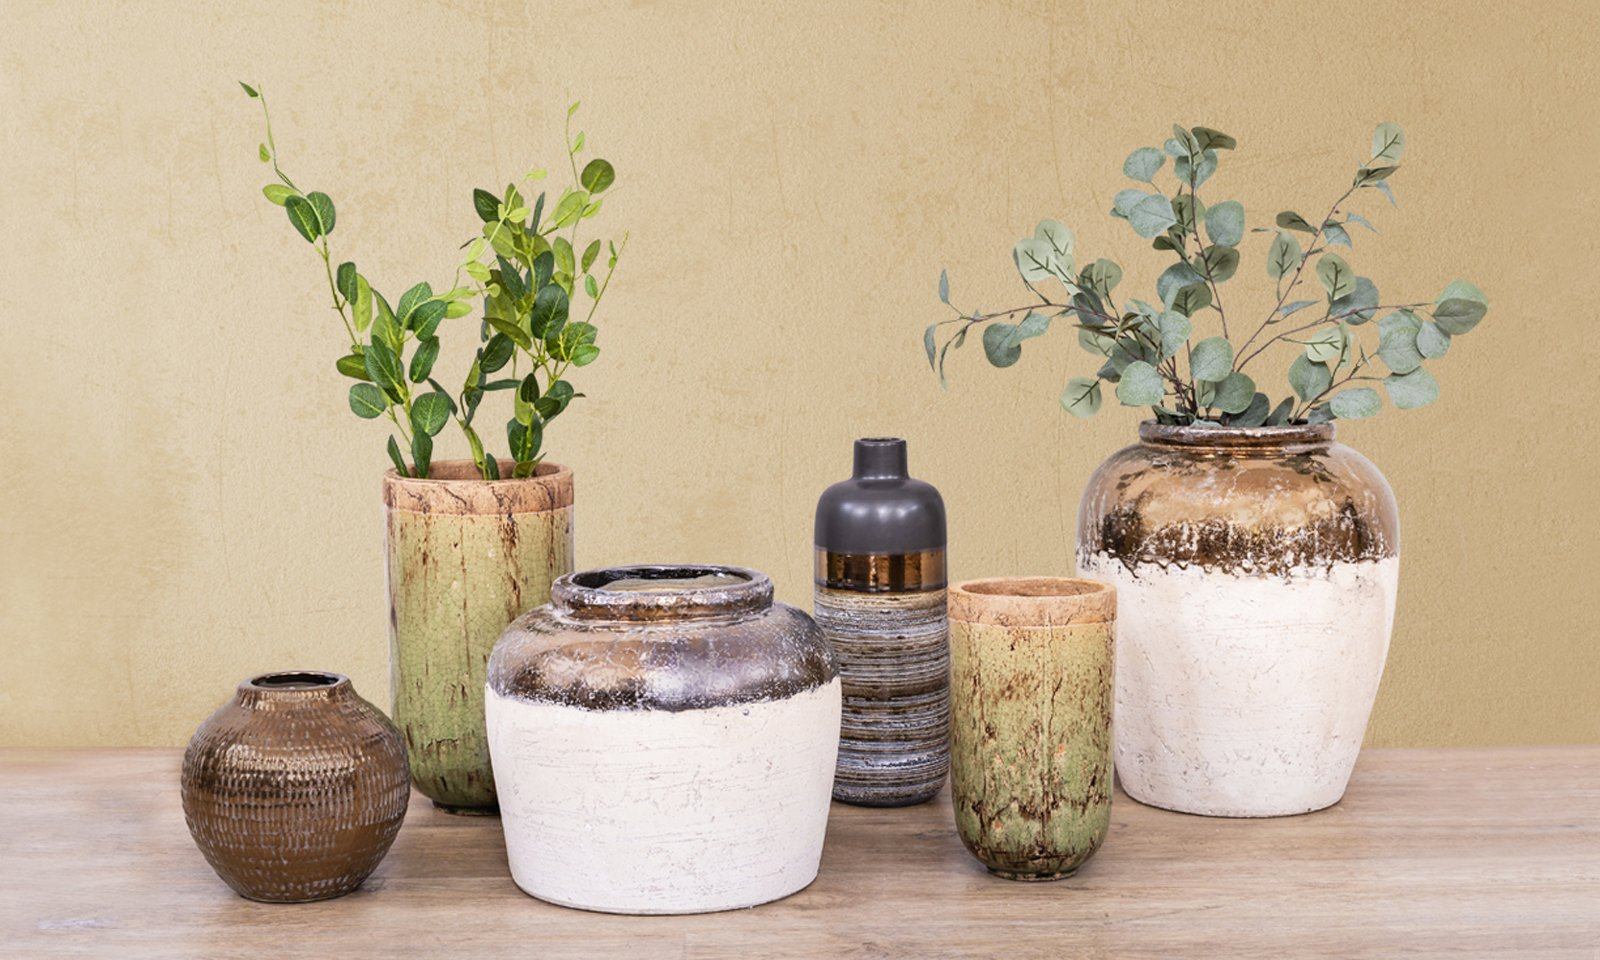 HOW TO DECORATE WITH VASES